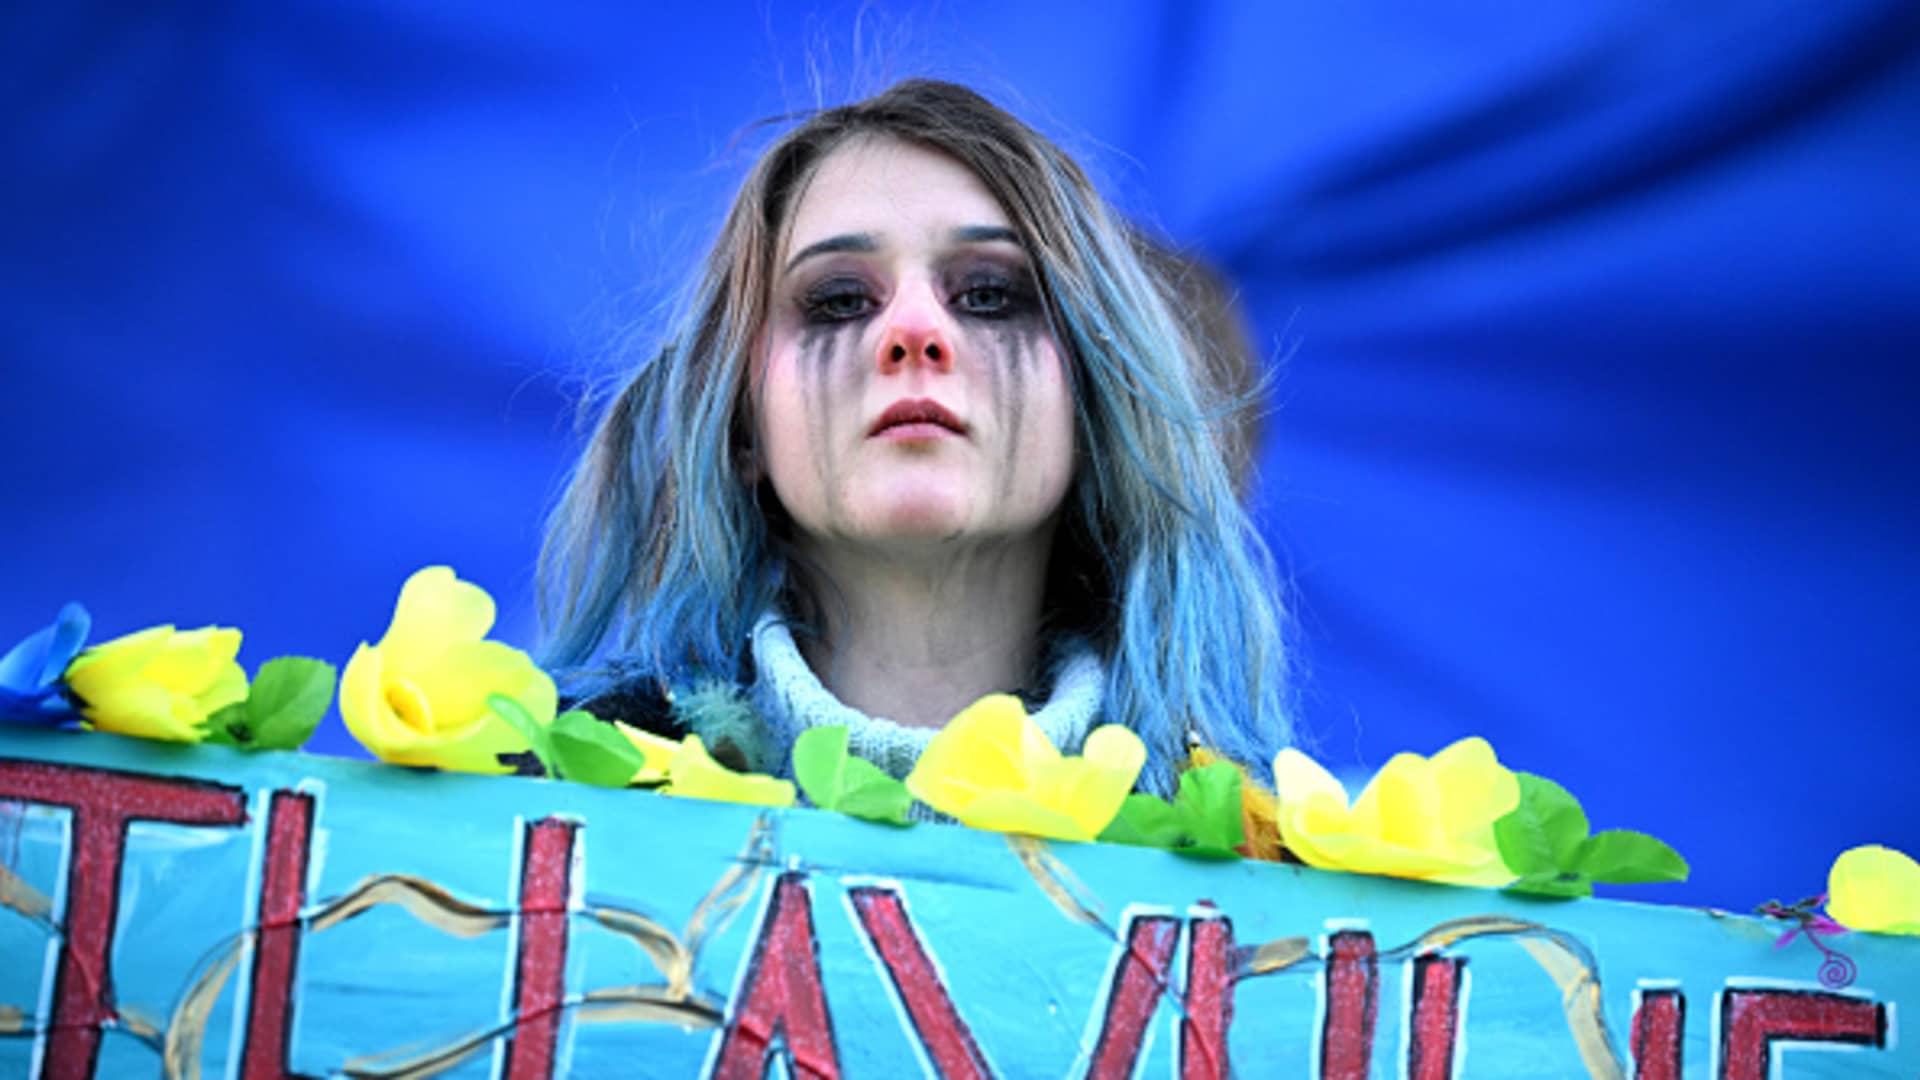 A protester who has been crying holds a banner during a demonstration in support of Ukraine in Trafalgar Square on February 27, 2022 in London, England.